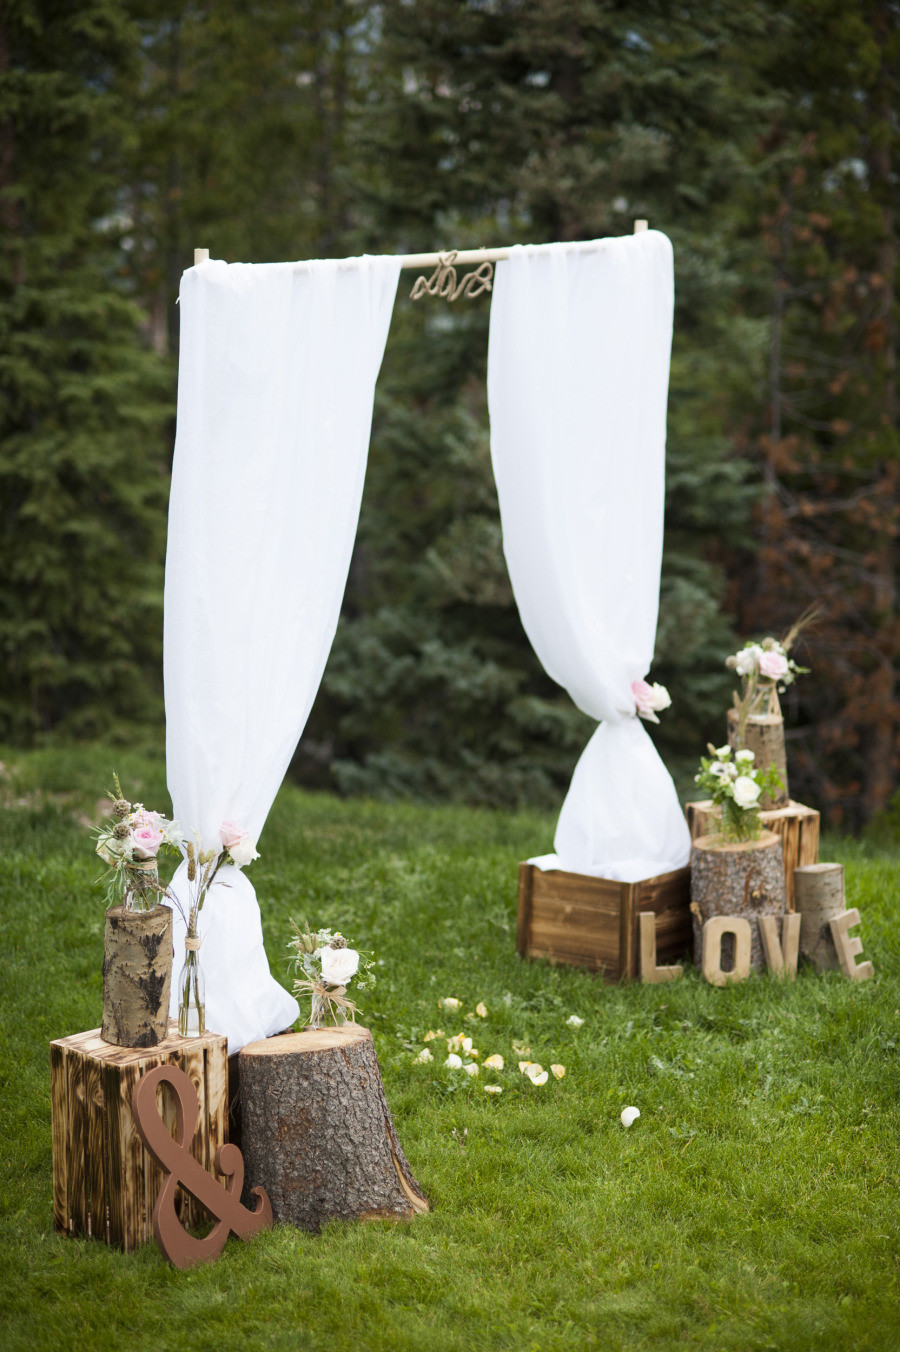 Simple Wedding Decorations
 Say “I Do” to These Fab 51 Rustic Wedding Decorations